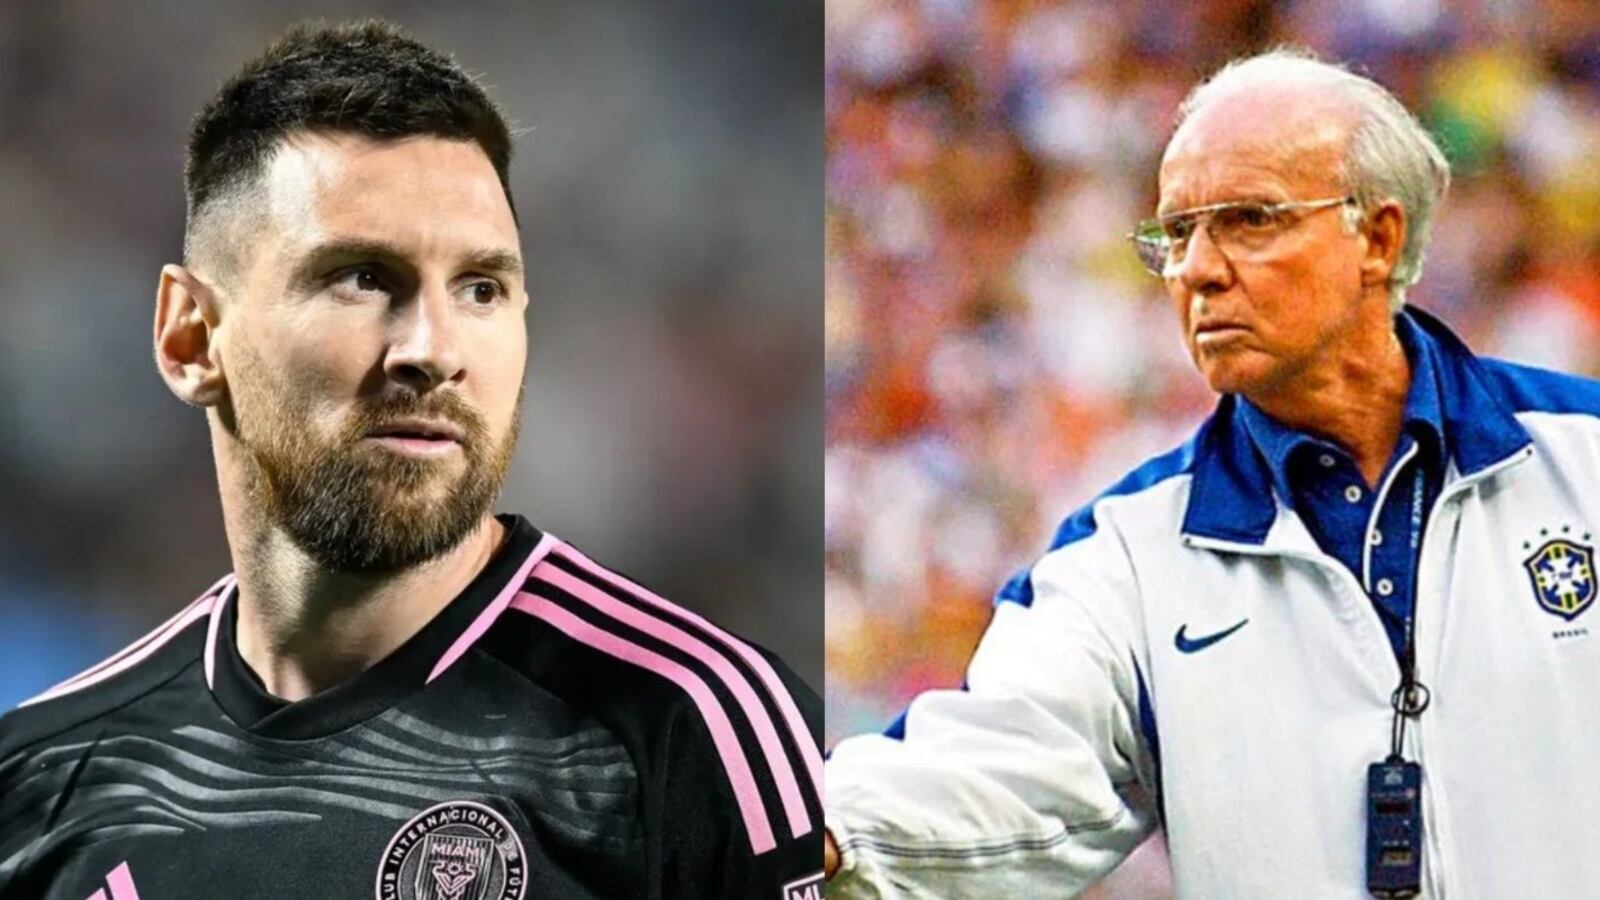 After Zagallo's death, the strong phrase that involves Lionel Messi and Pelé